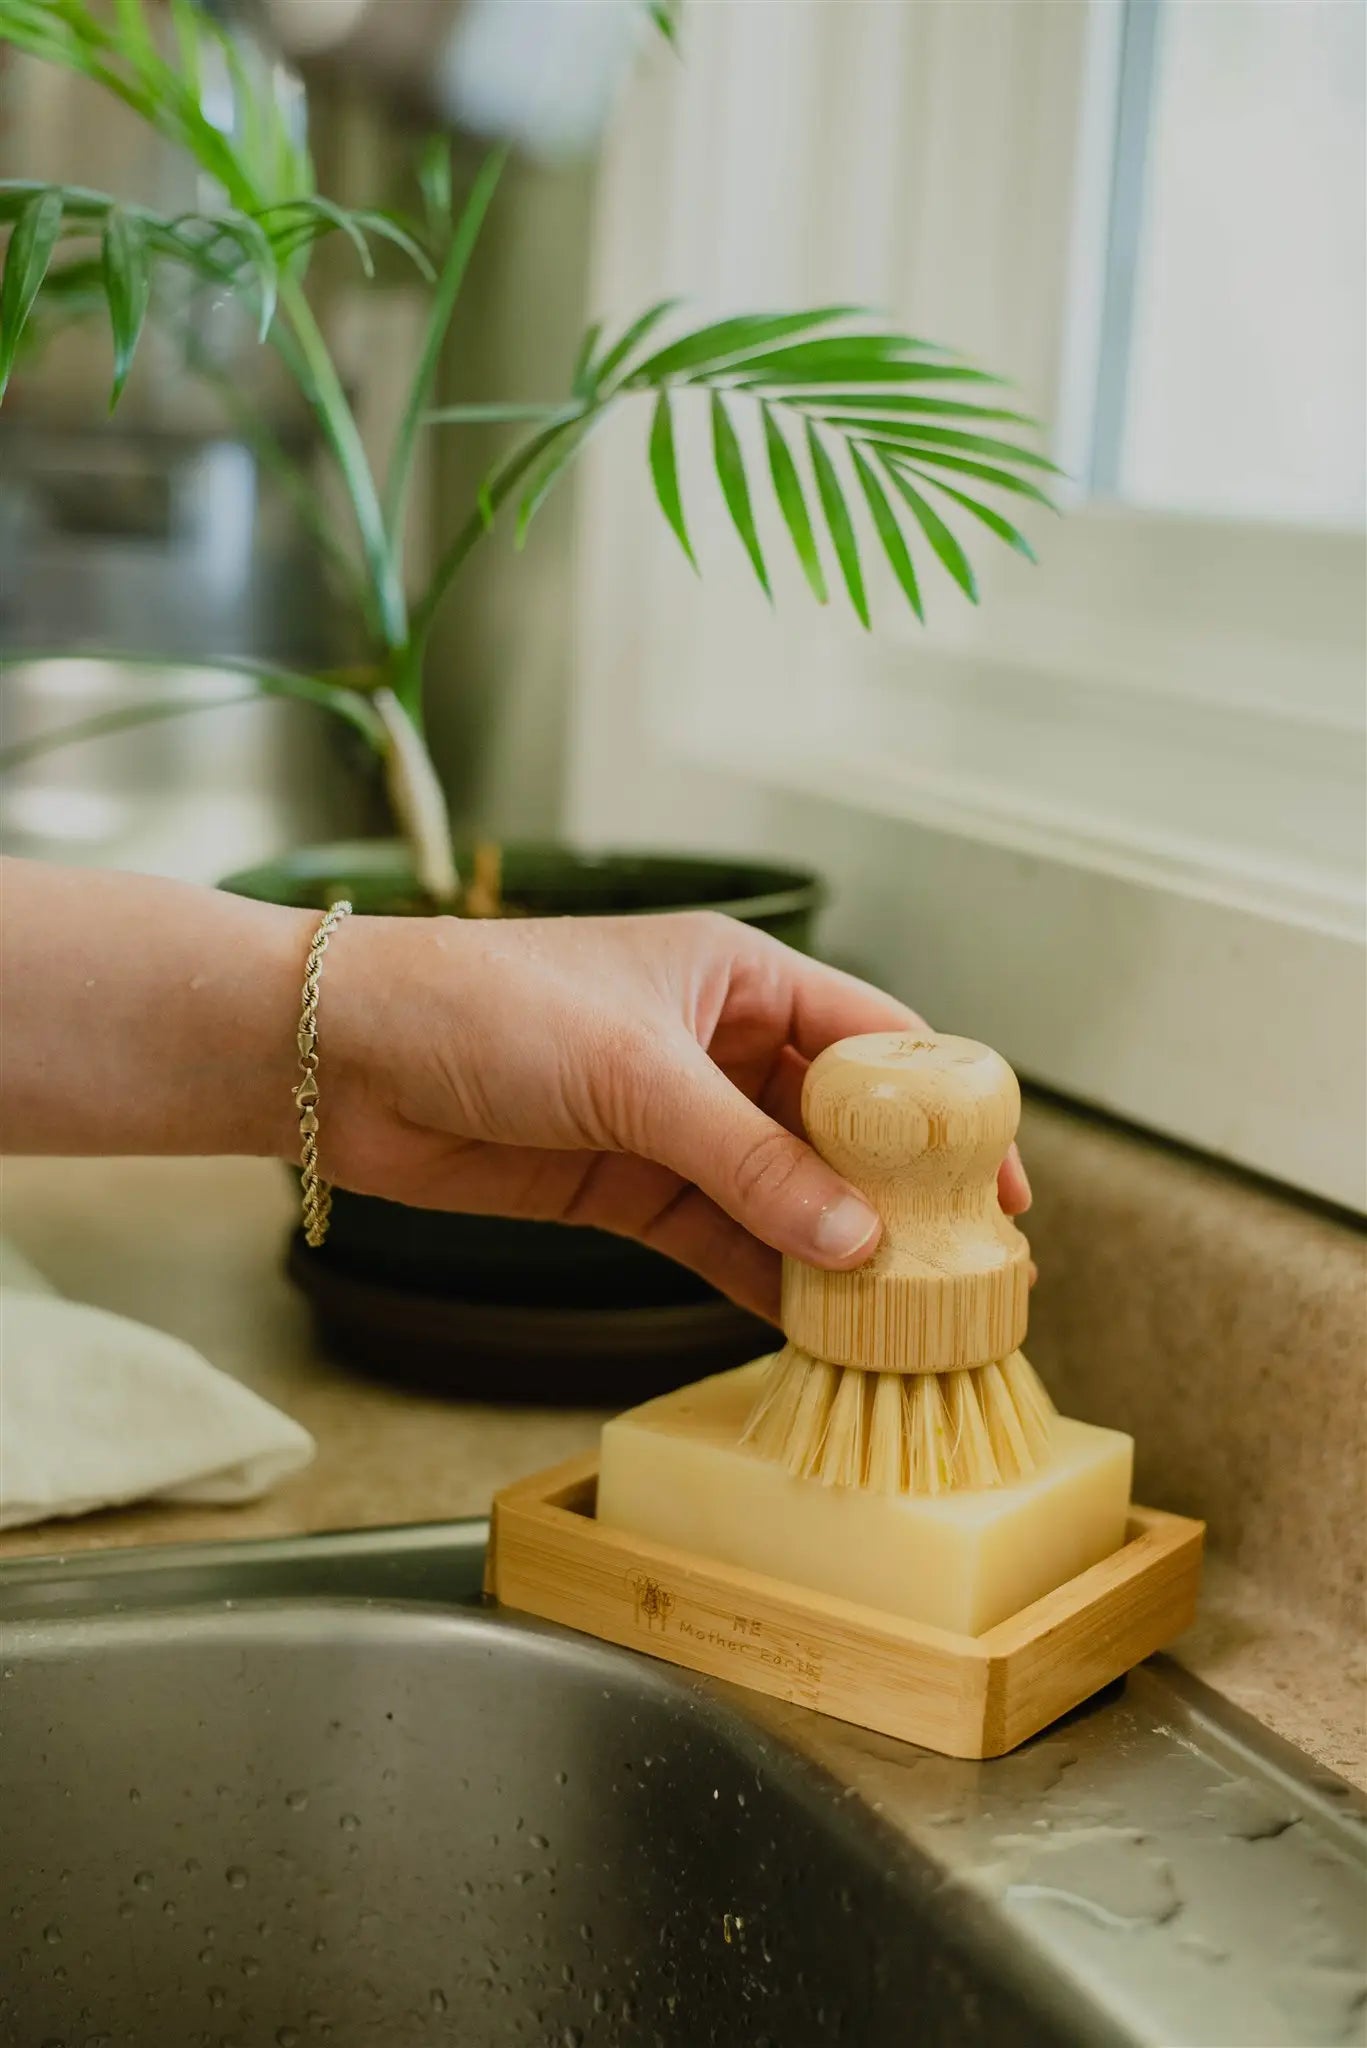 Bamboo soap dish in use with dishwashing soap bar and woman holding a cleaning brush